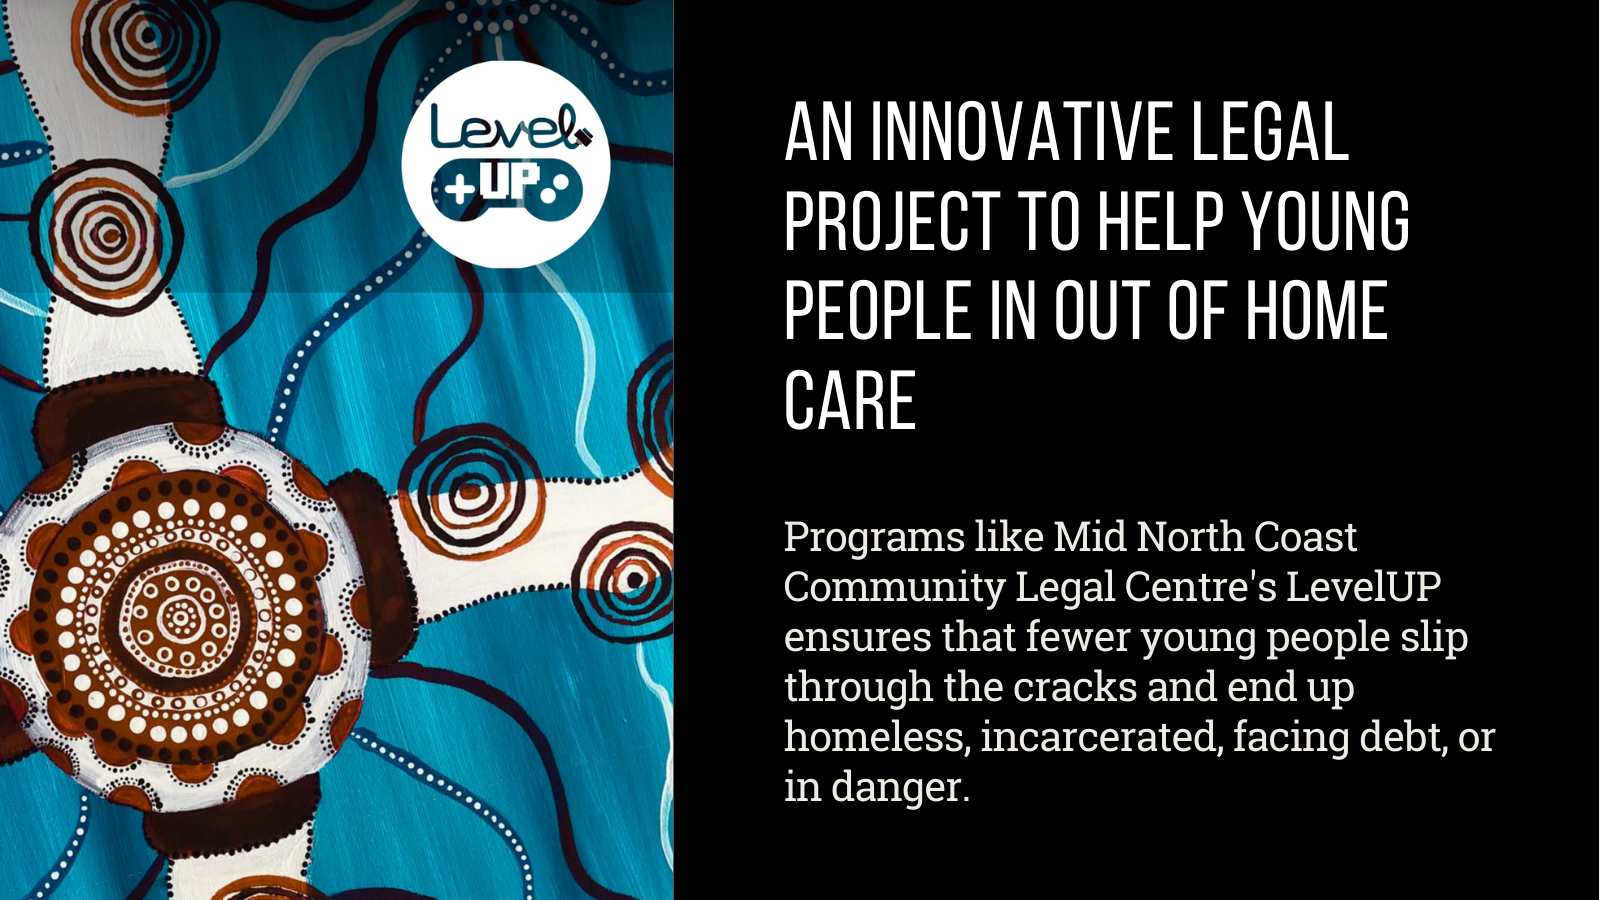 "LevelUP, an innovative project at Mid North Coast Community Legal Centre, provided vital support to young people exiting out-of-home-care. Programs like this ensure that fewer young people slip through the cracks and end up homeless, incarcerated, facing debt, or in danger. By Melanie Kallmier, Mid North Coast Community Legal Centre.